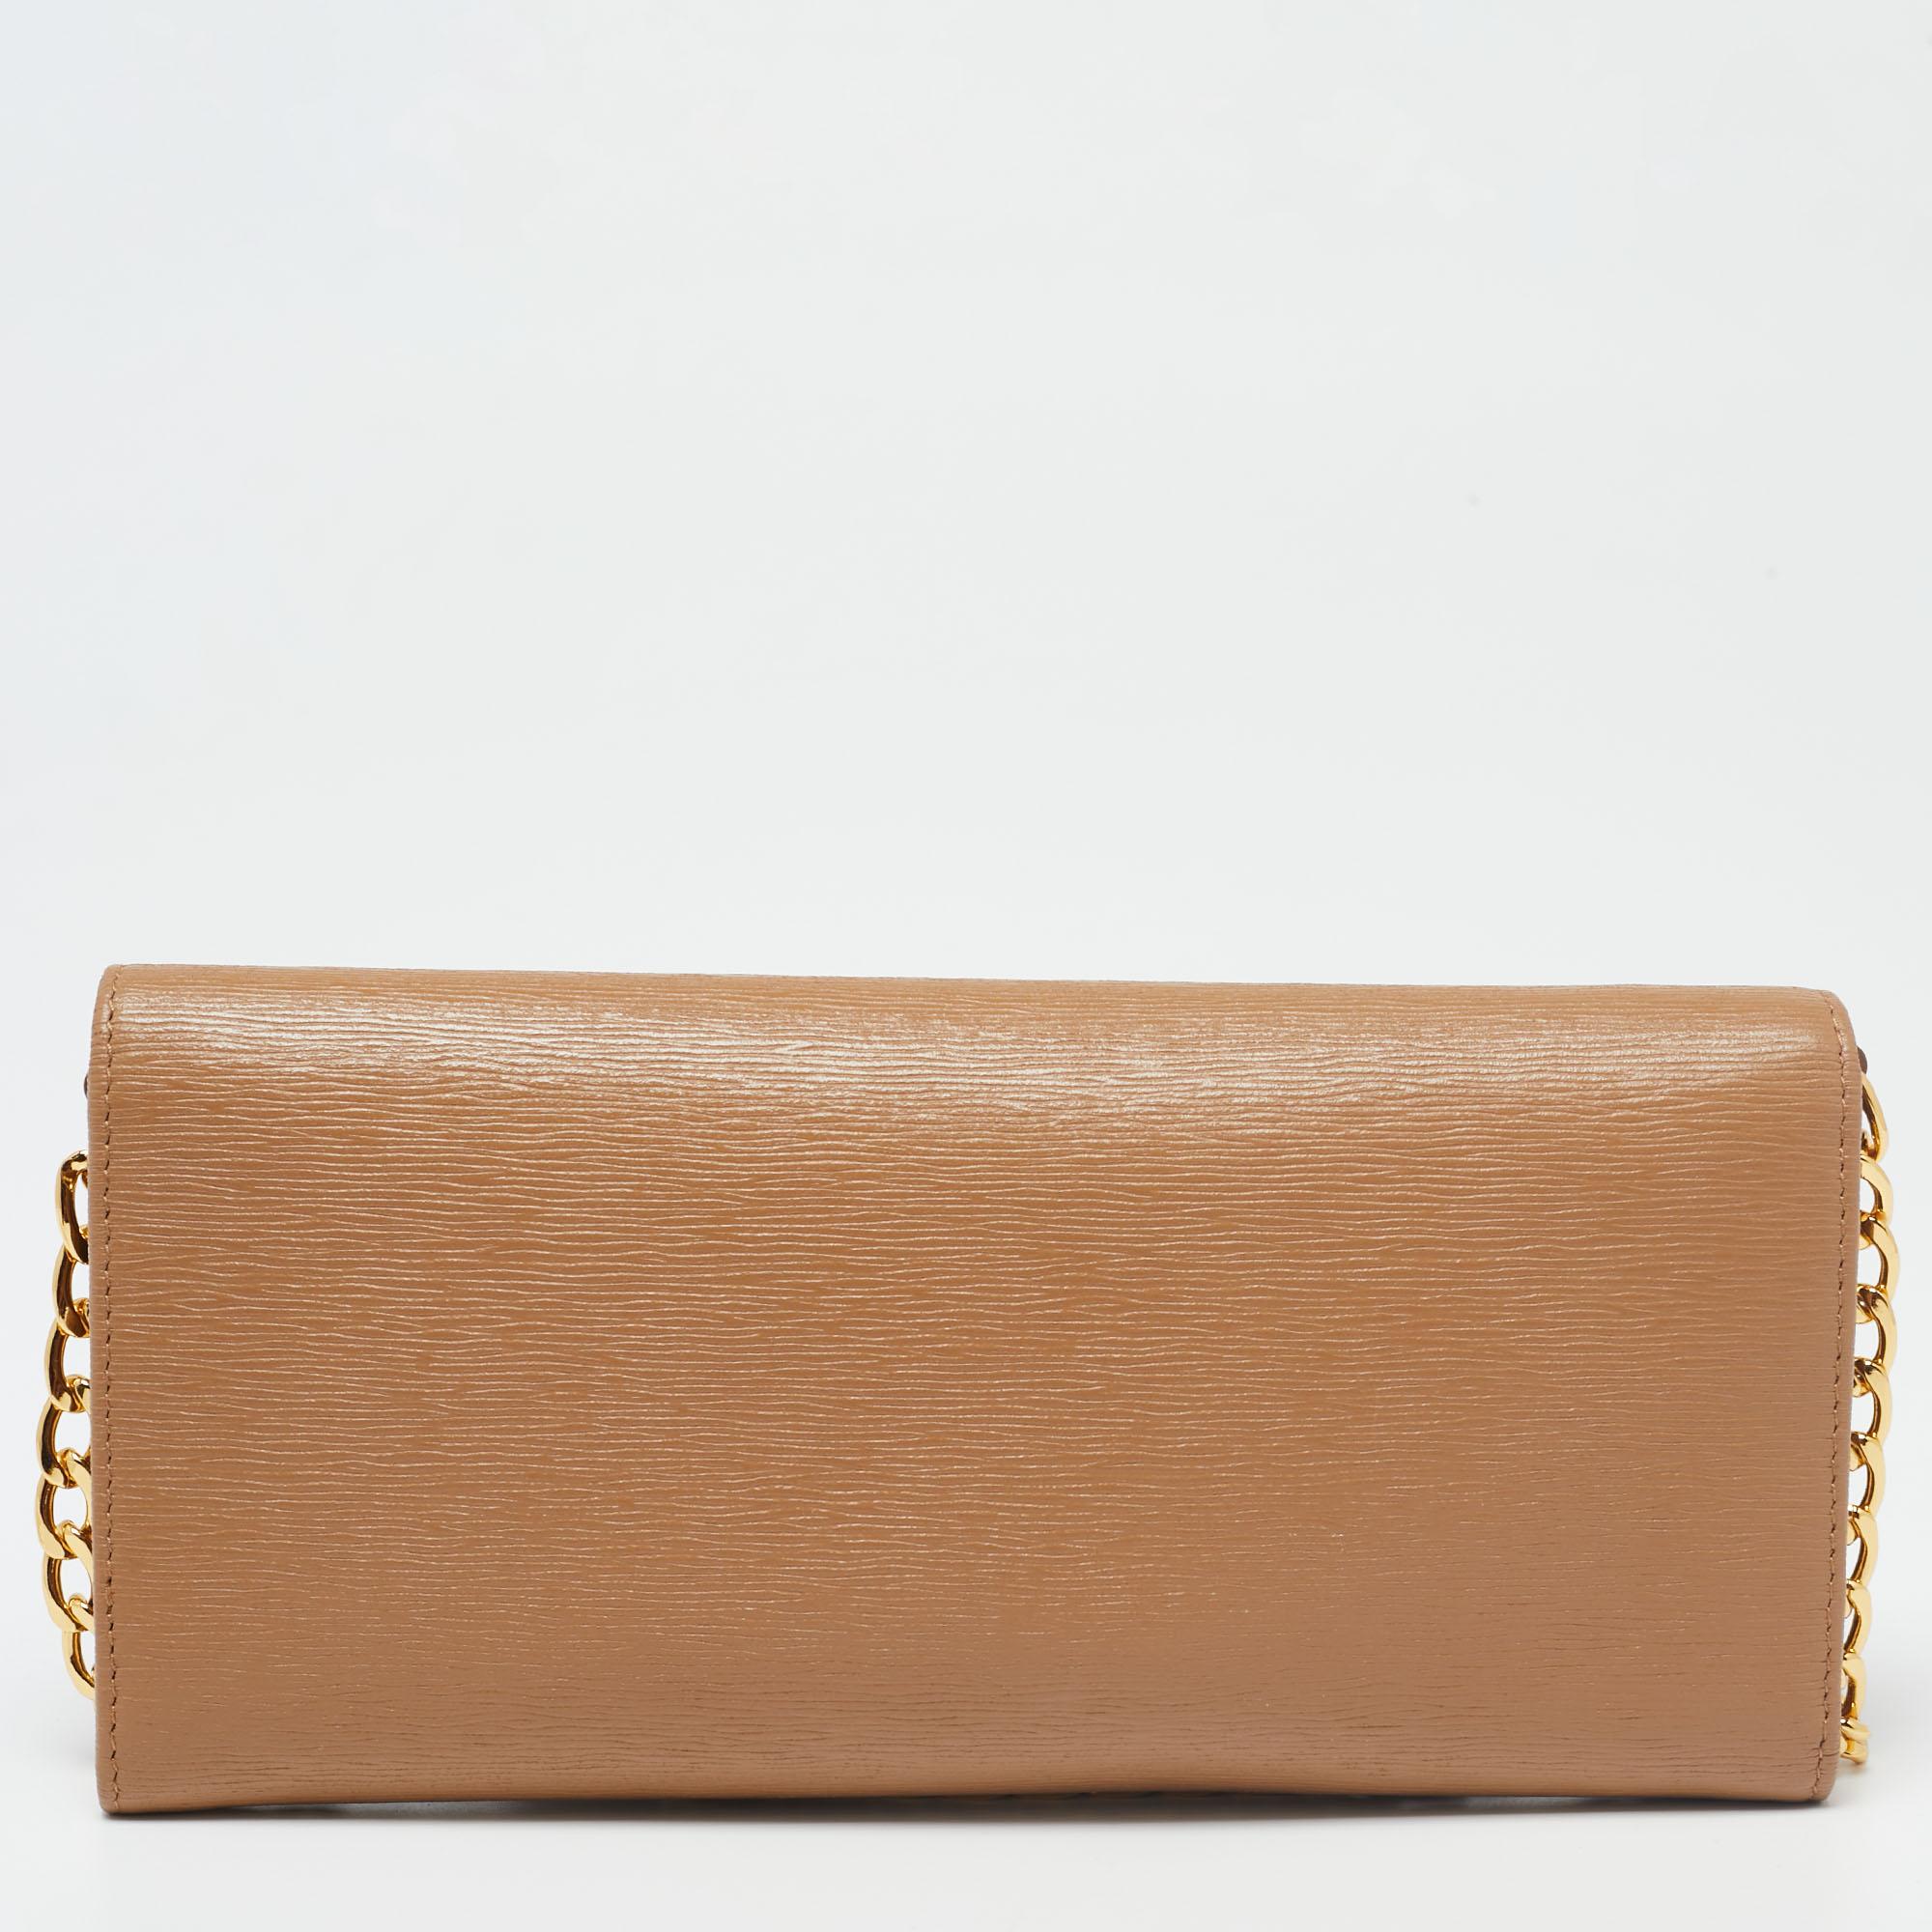 Now here's a creation that is both stylish and functional! The house of Prada brings us this wallet on chain that will make you look glamorous! It is made from caramel-hued leather and features a gold-tone logo accent on the front. It is completed